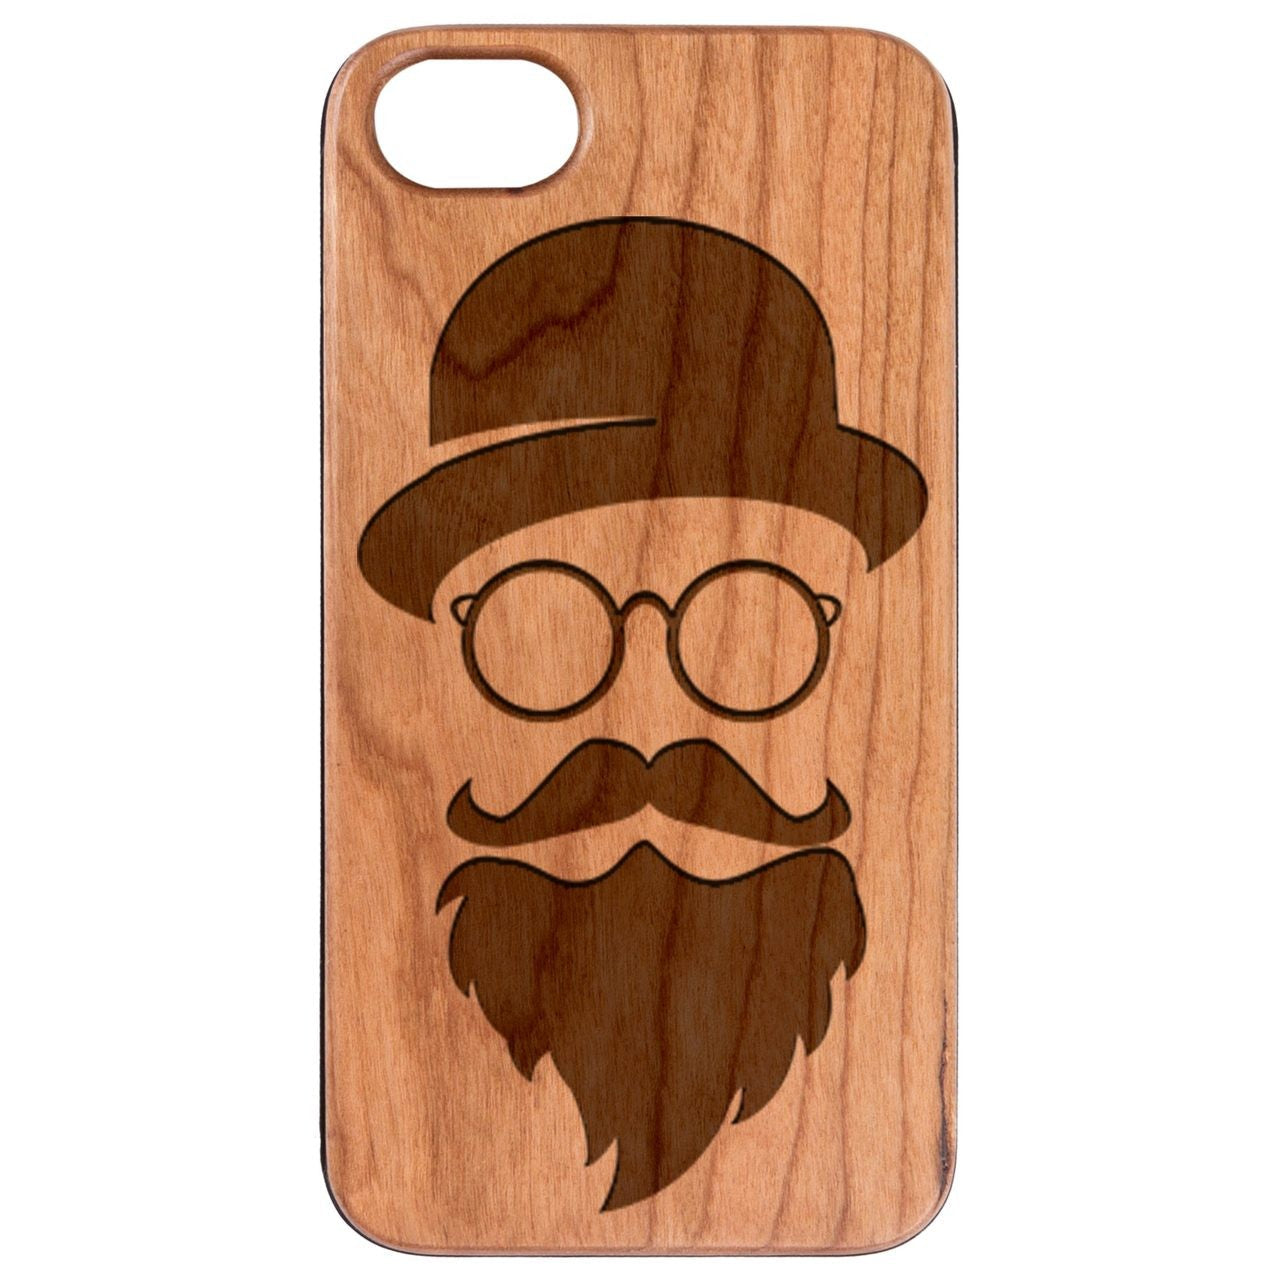  Hollow Man - Engraved - Wooden Phone Case - IPhone 13 Models